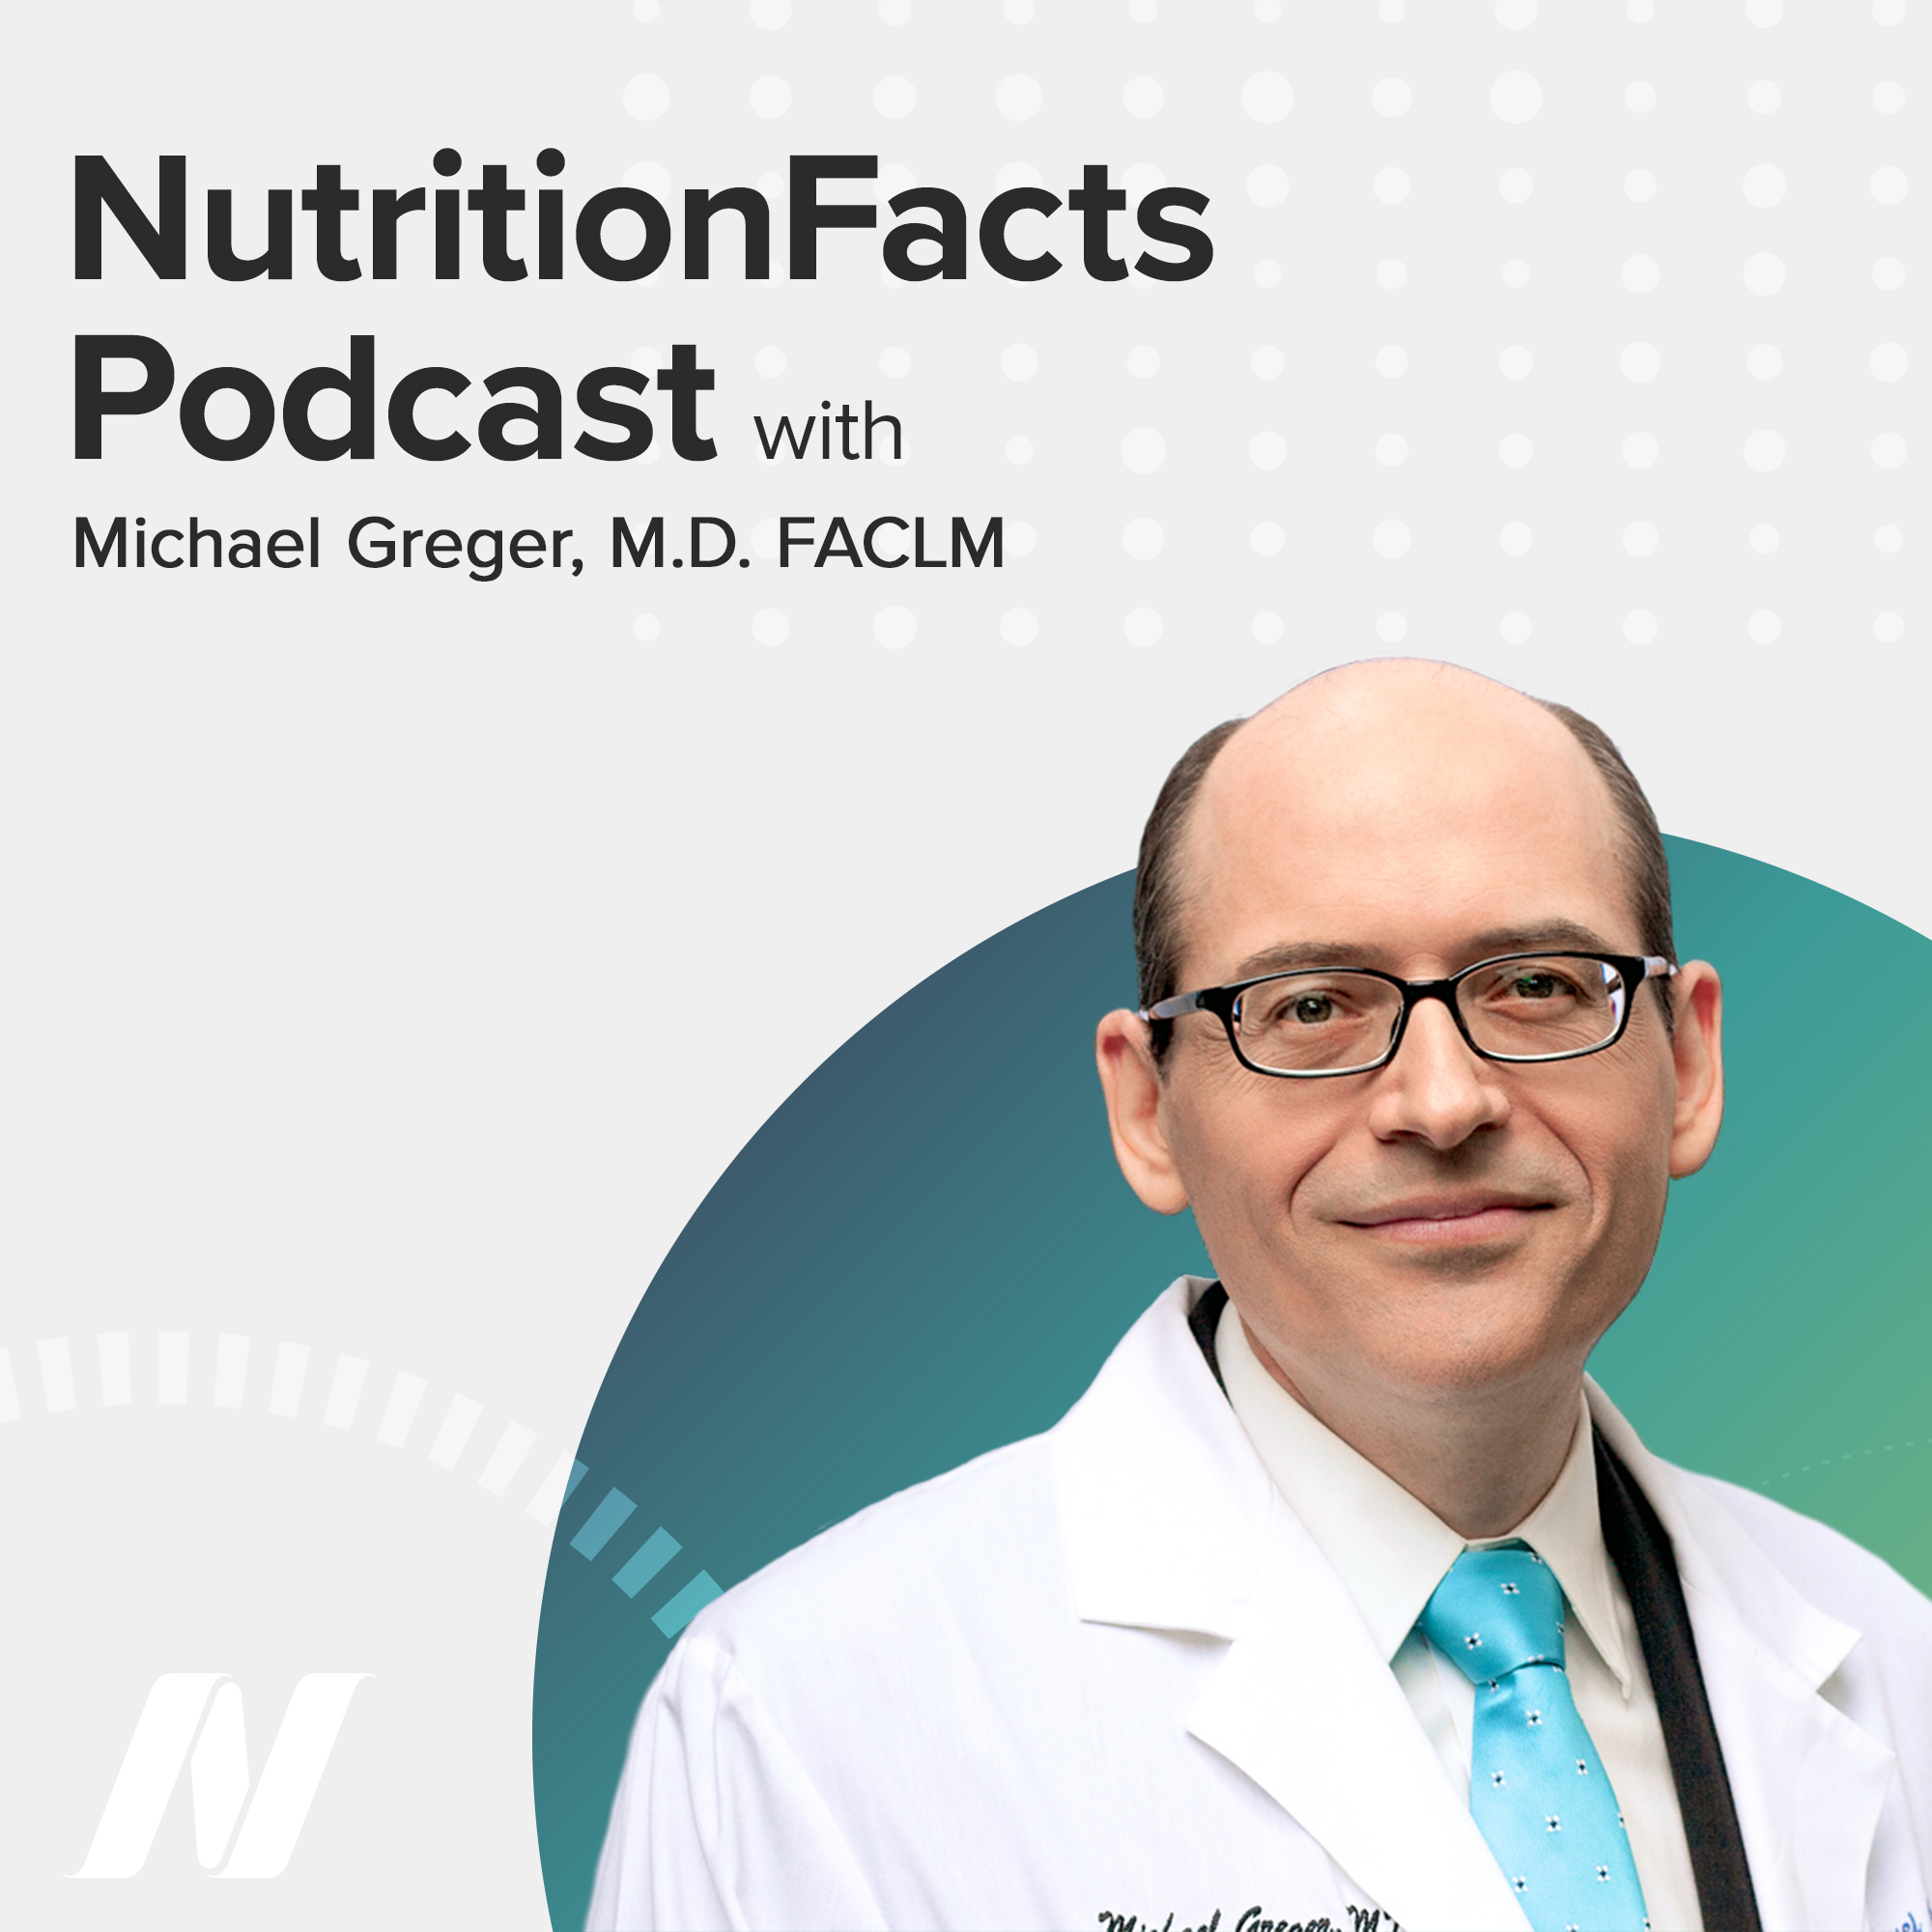 Instead of Taking Probiotics, Dr. Greger Recommends Eating More Raw Fruits & Vegetables